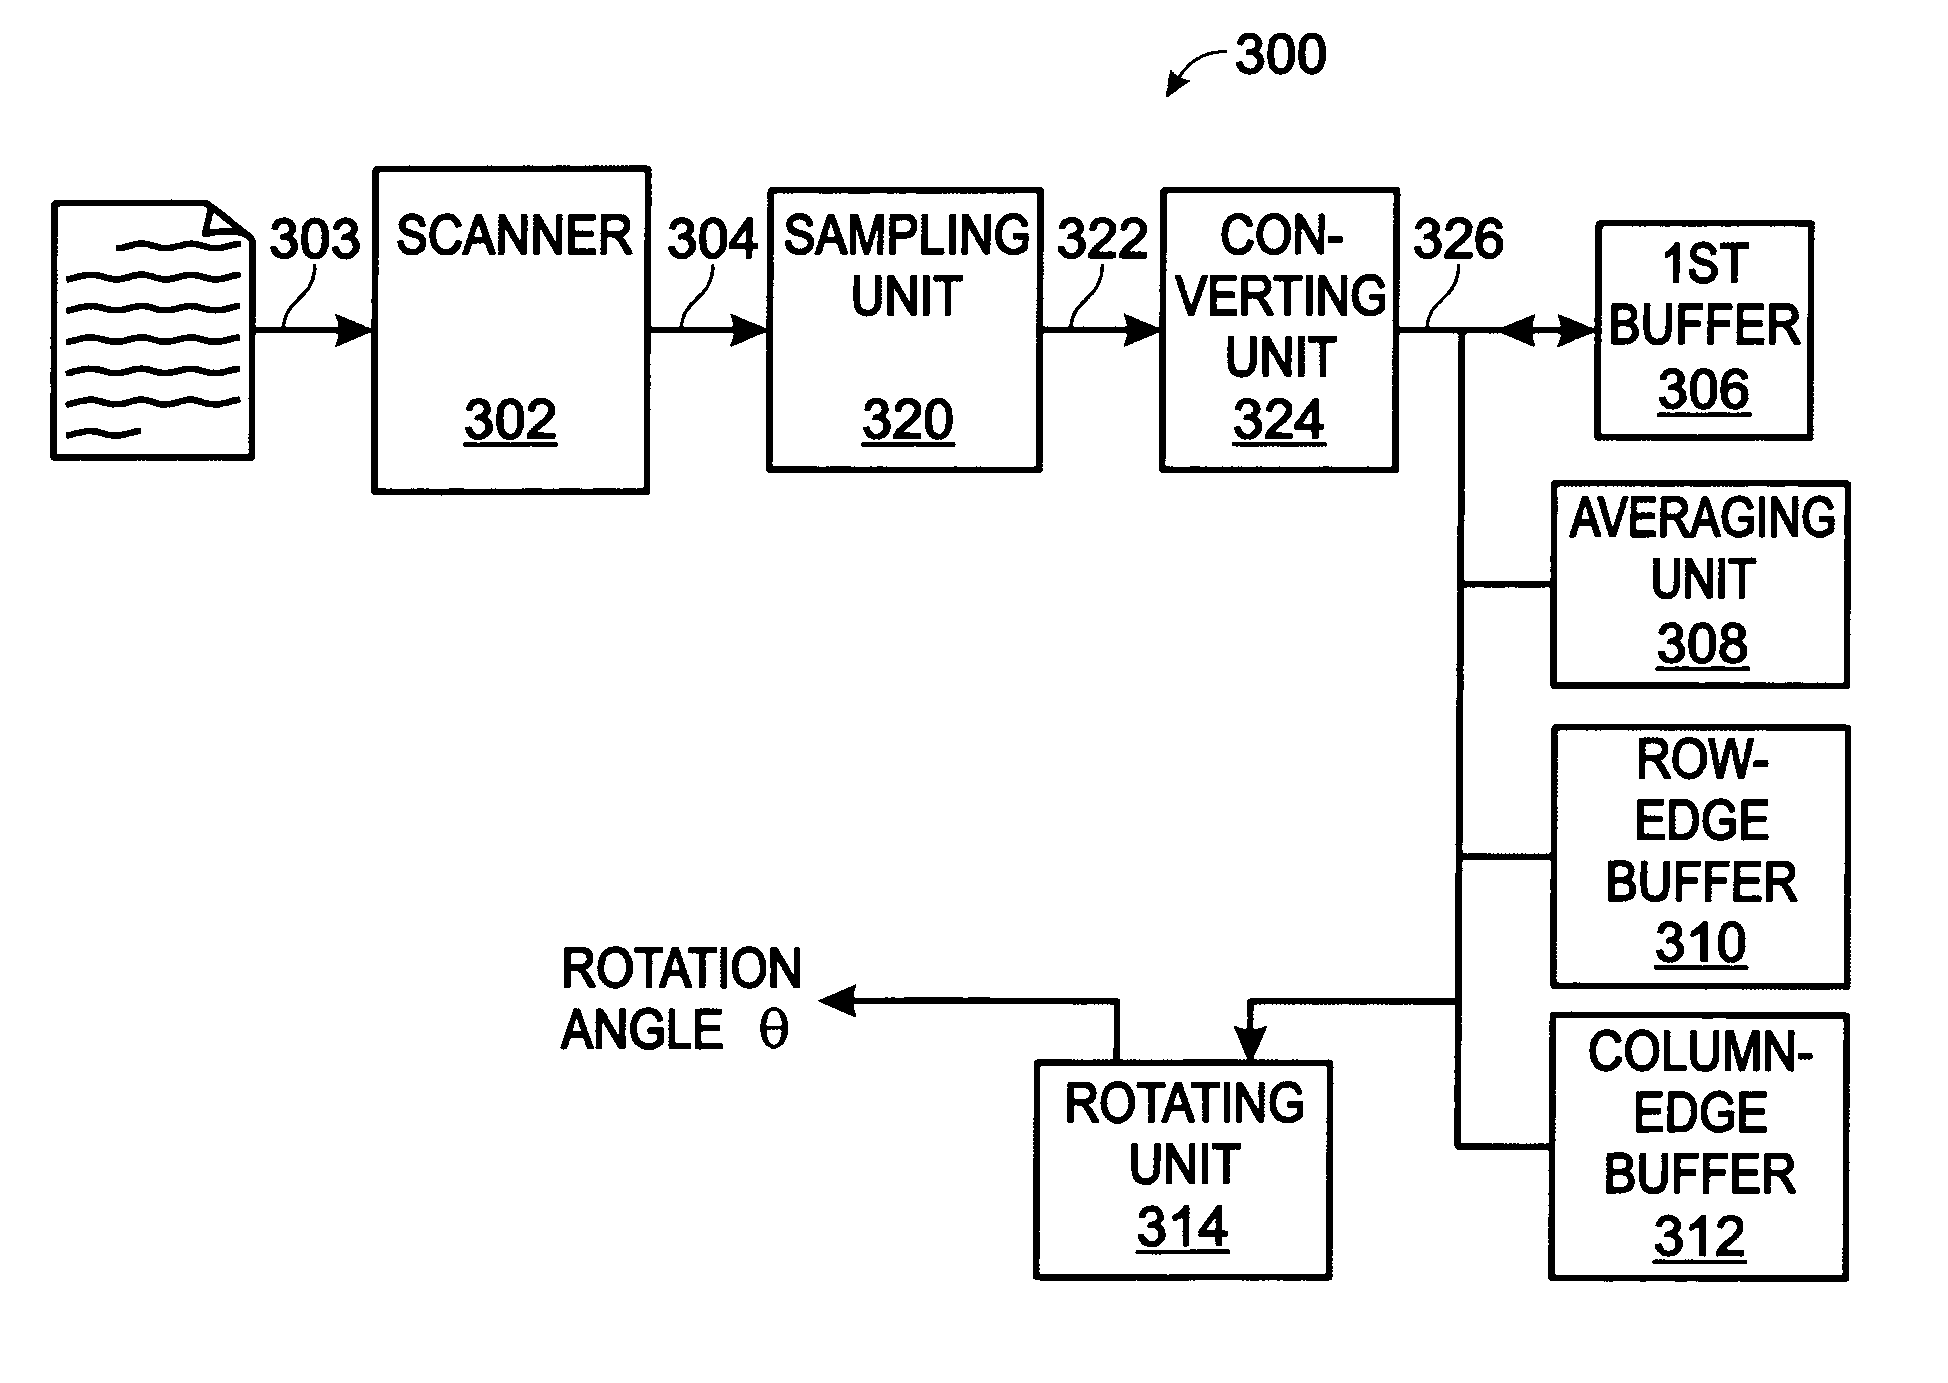 System and method for digital document alignment